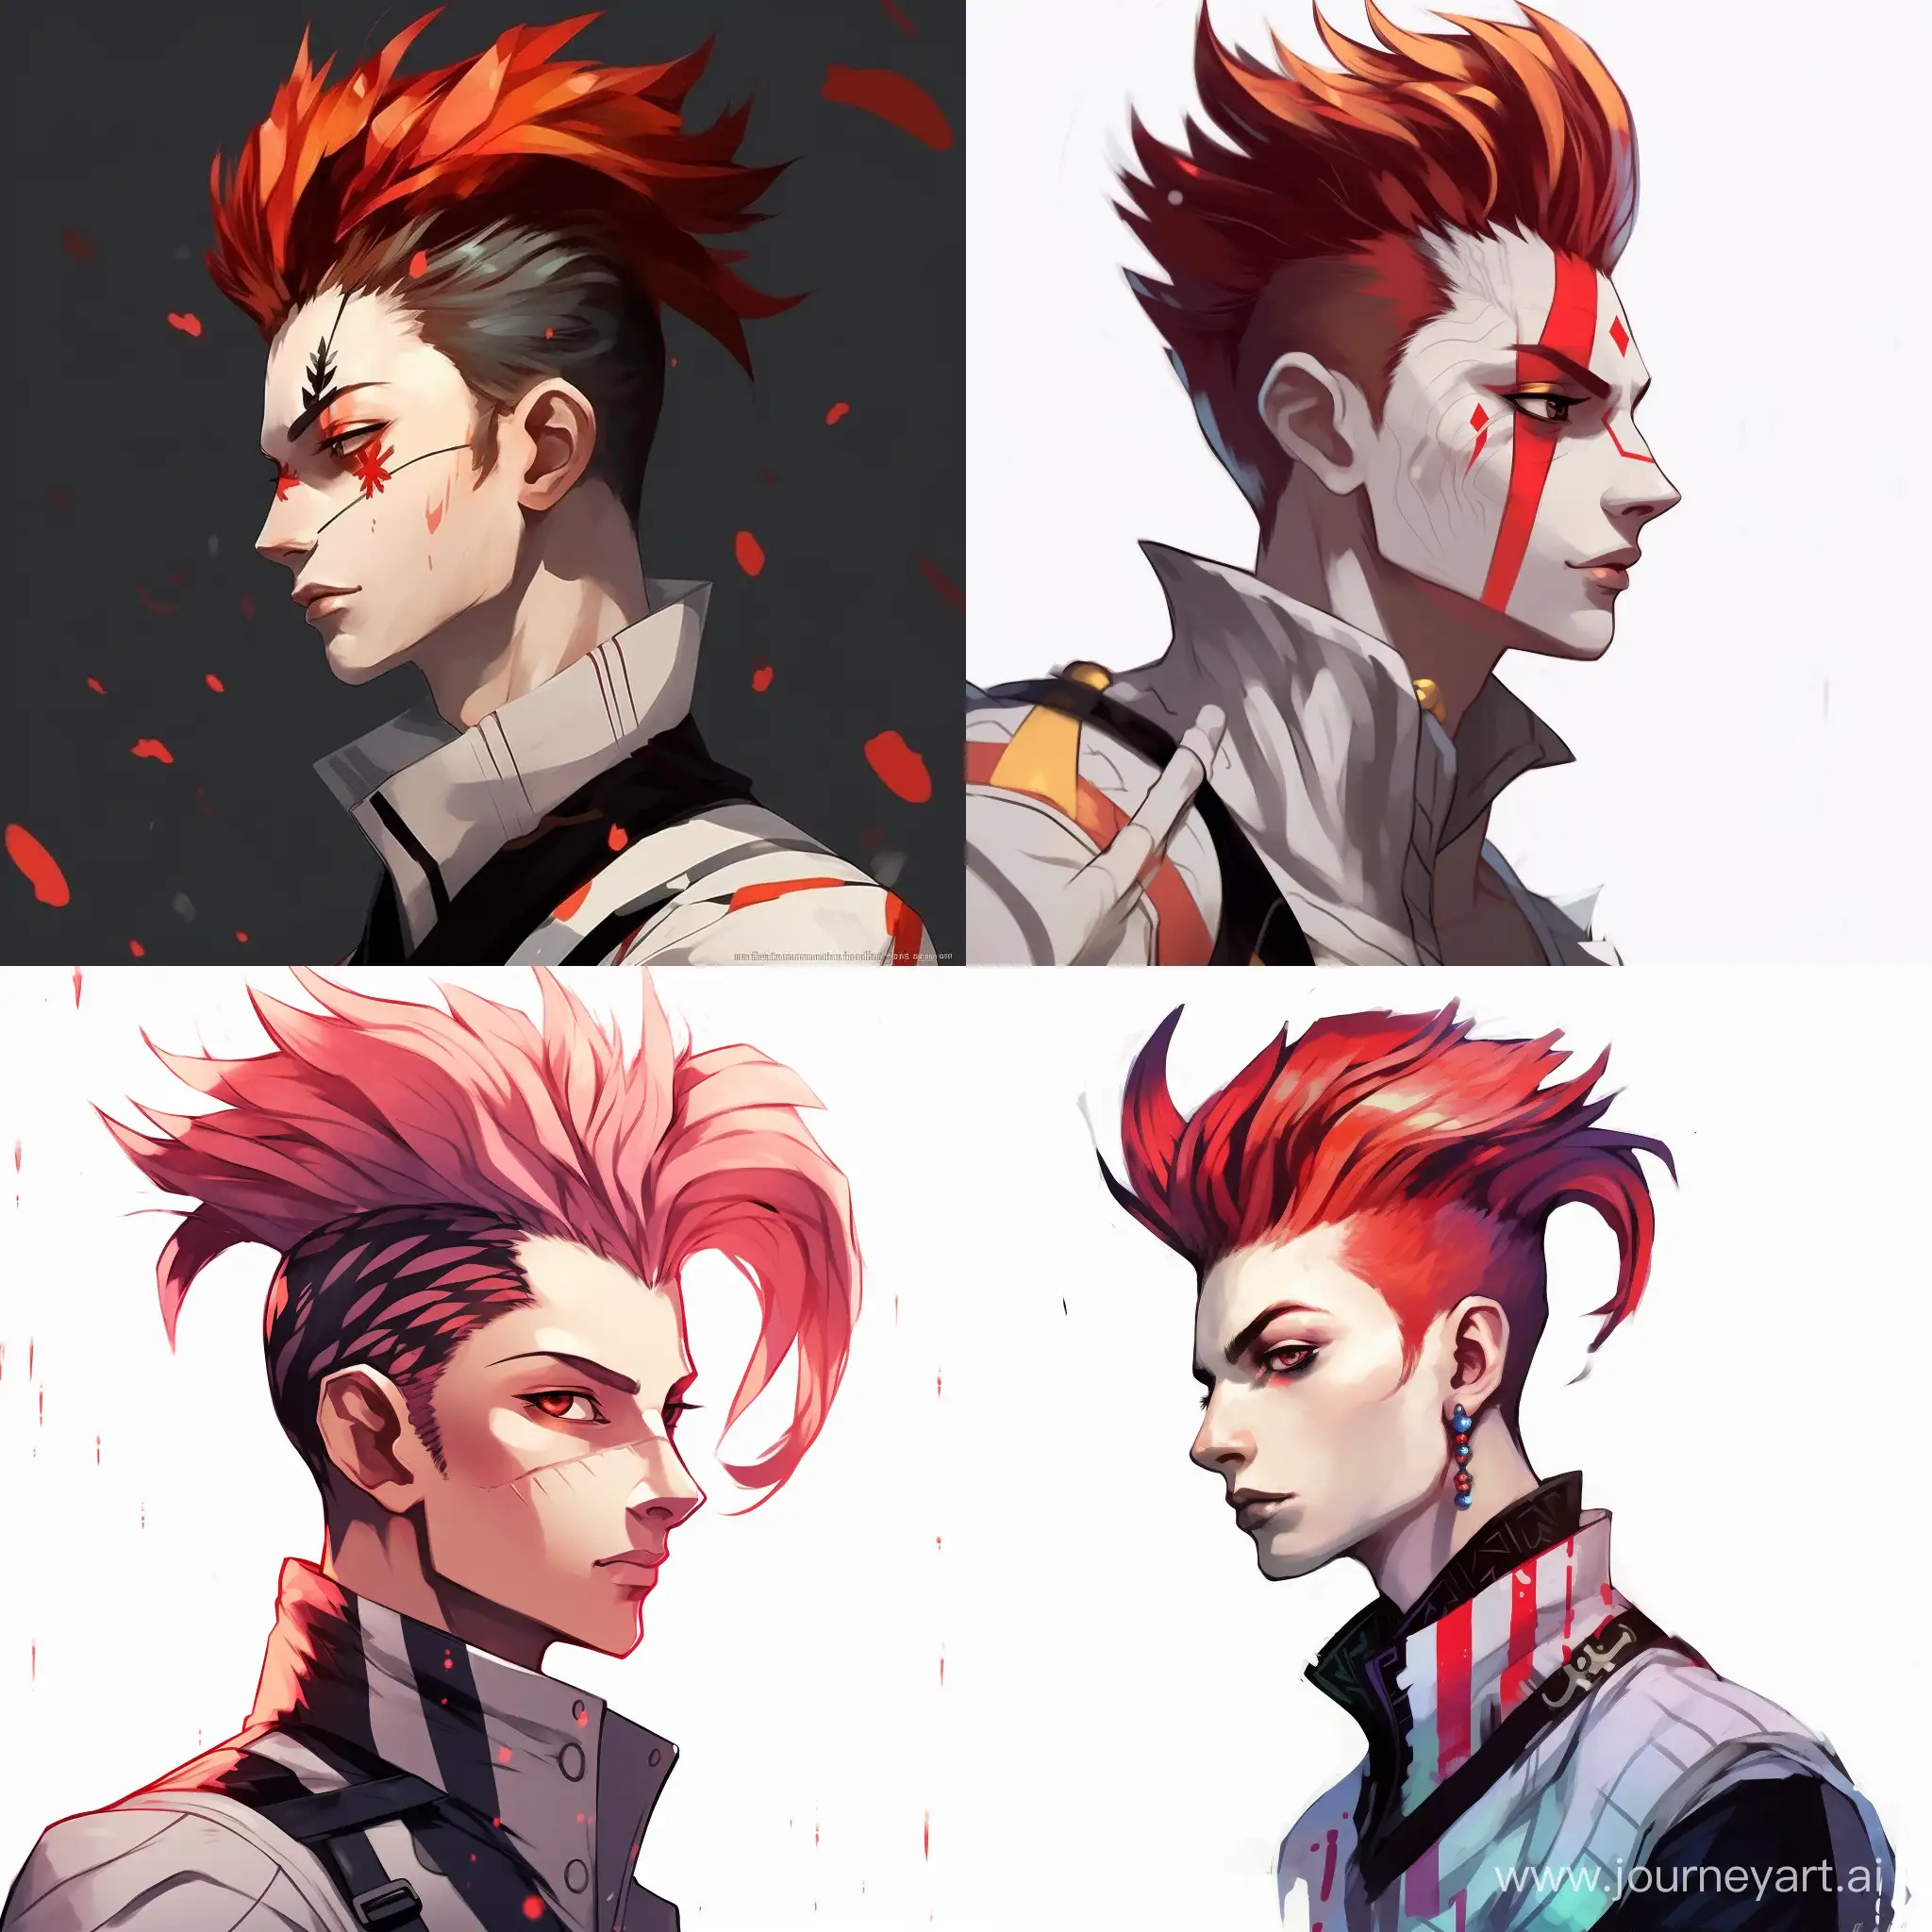 Hisoka-Avatar-AnimeInspired-Profile-Picture-with-a-11-Aspect-Ratio